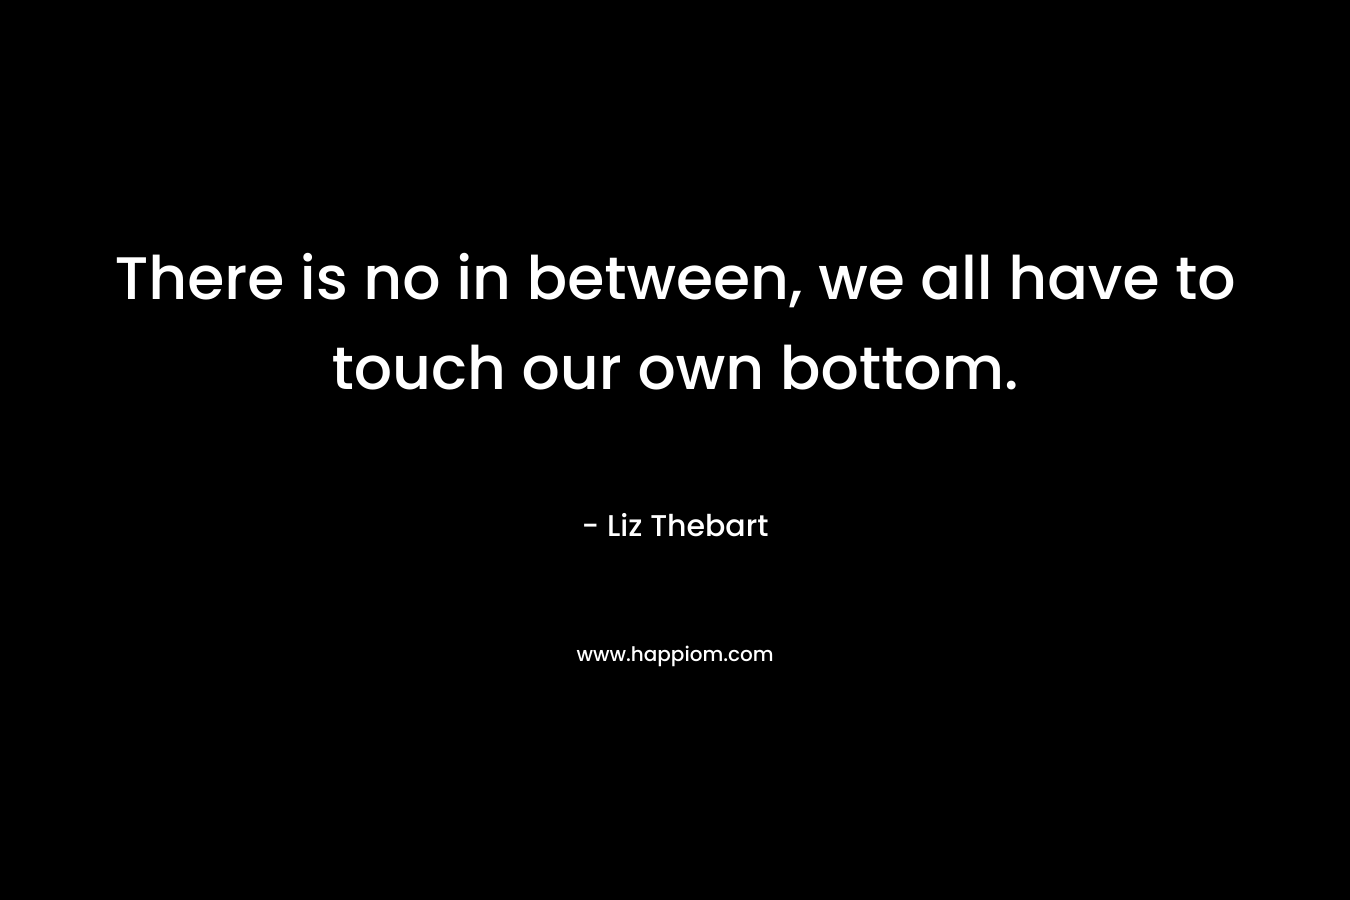 There is no in between, we all have to touch our own bottom.